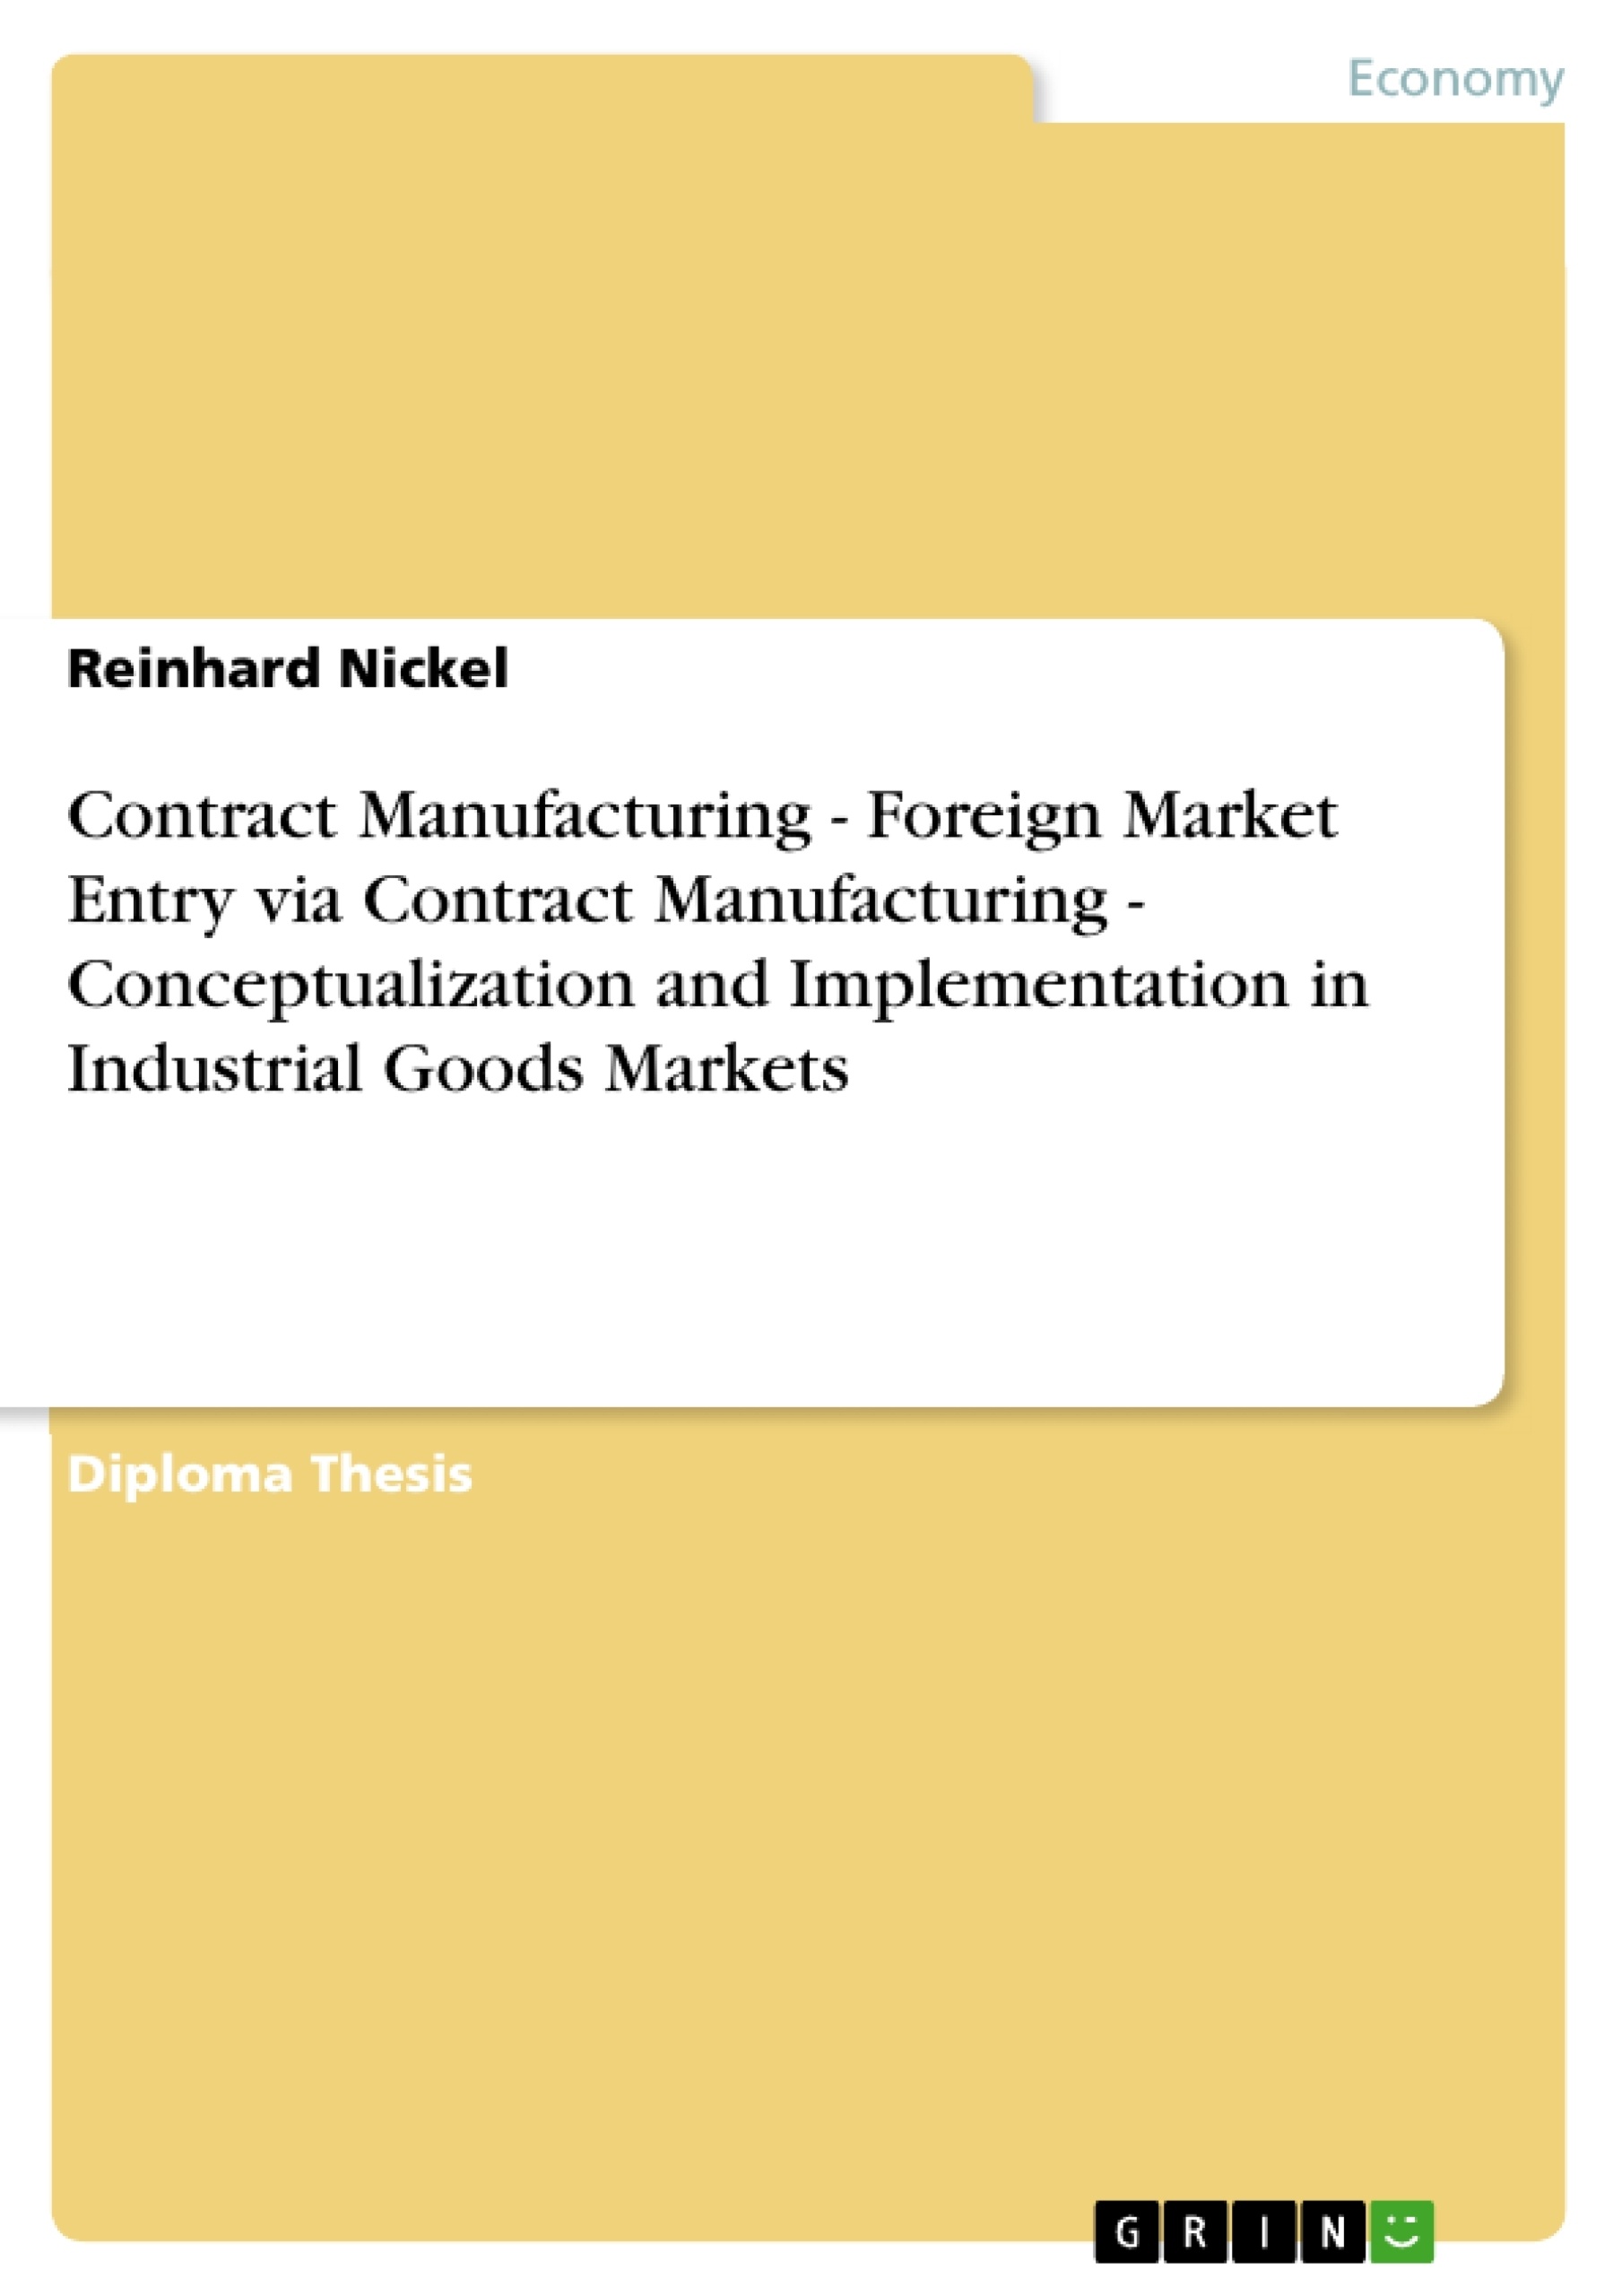 Title: Contract Manufacturing - Foreign Market Entry via Contract Manufacturing - Conceptualization and Implementation in Industrial Goods Markets